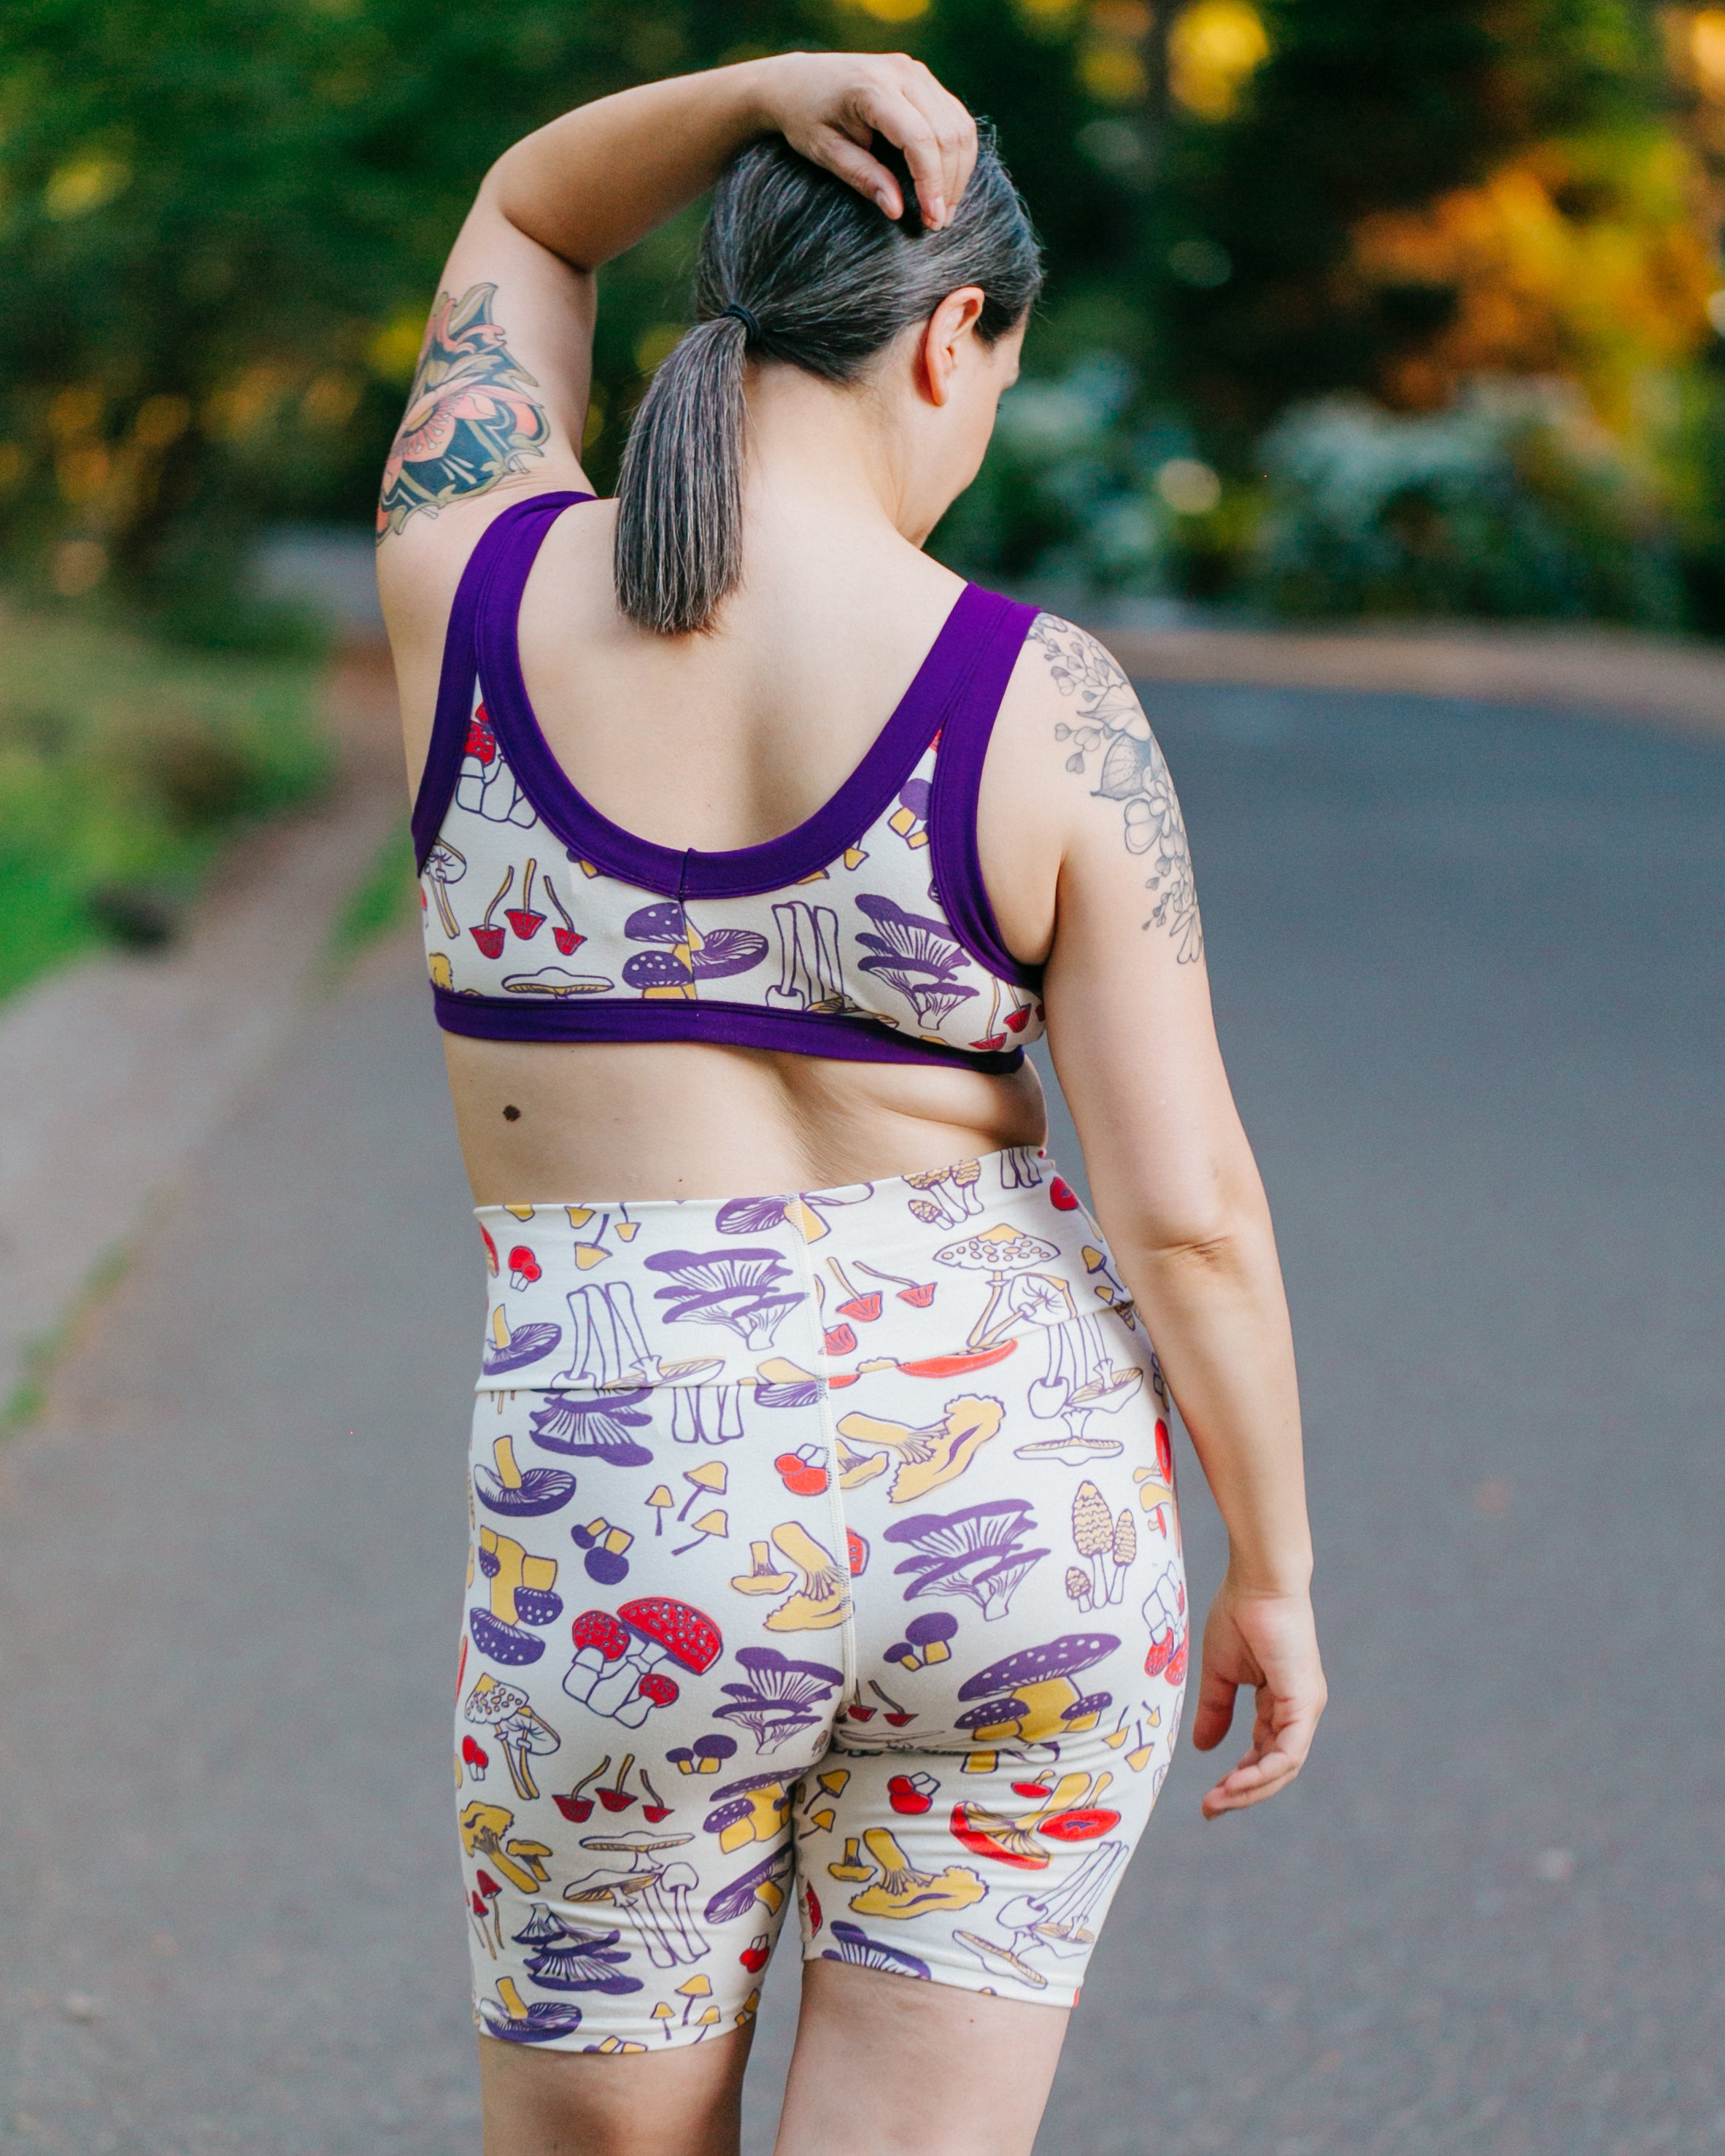 Model with her back to us wearing Bike Shorts and Bralette in Mushroom Magic print: different kinds of mushrooms in red, yellow, and purple colors.